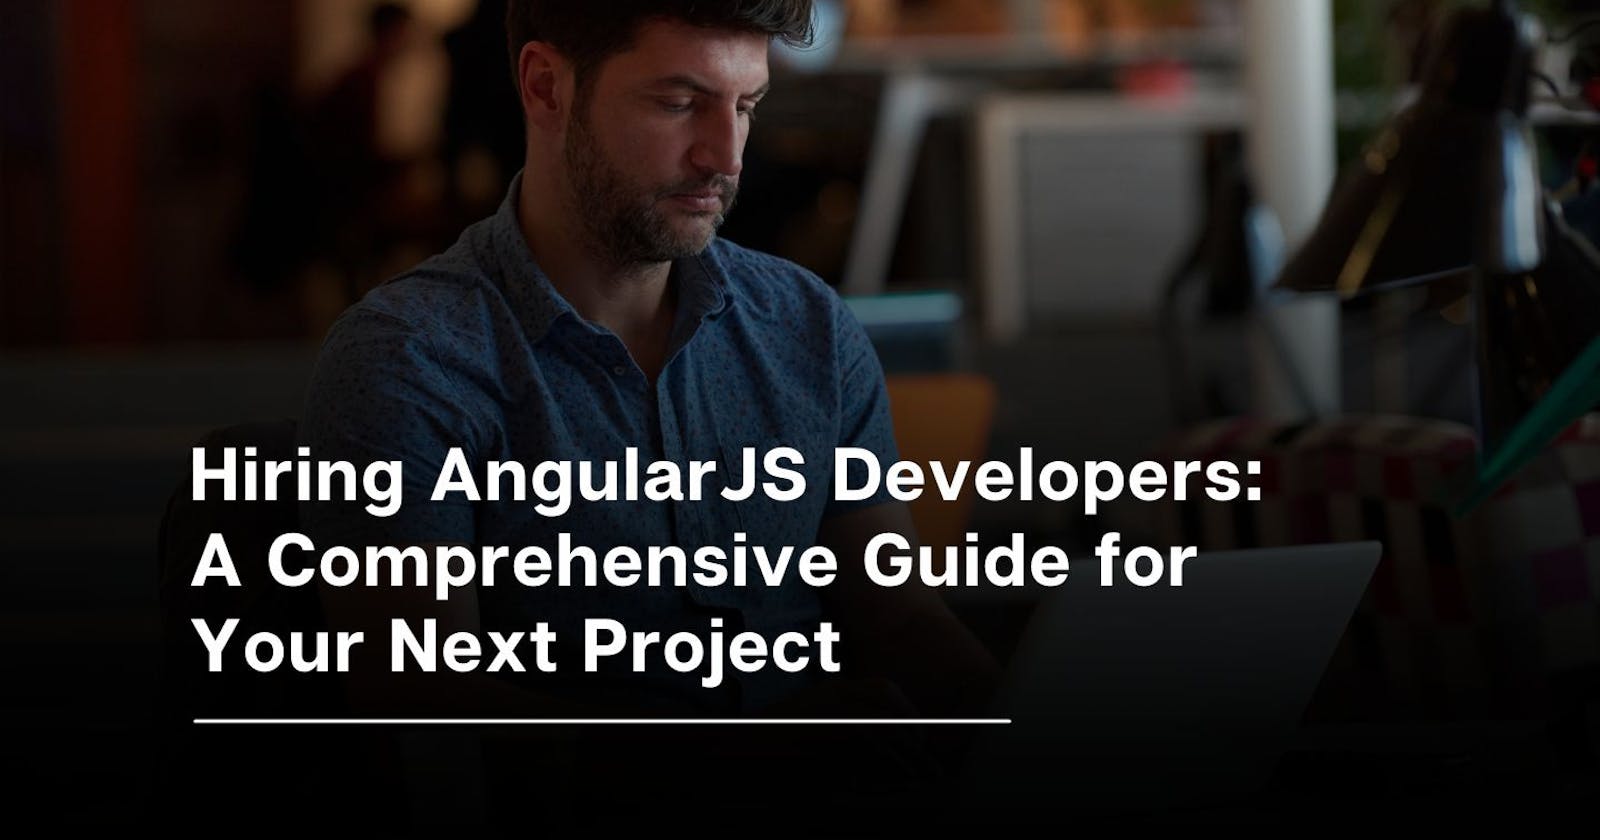 Hiring AngularJS Developers: A Comprehensive Guide for Your Next Project